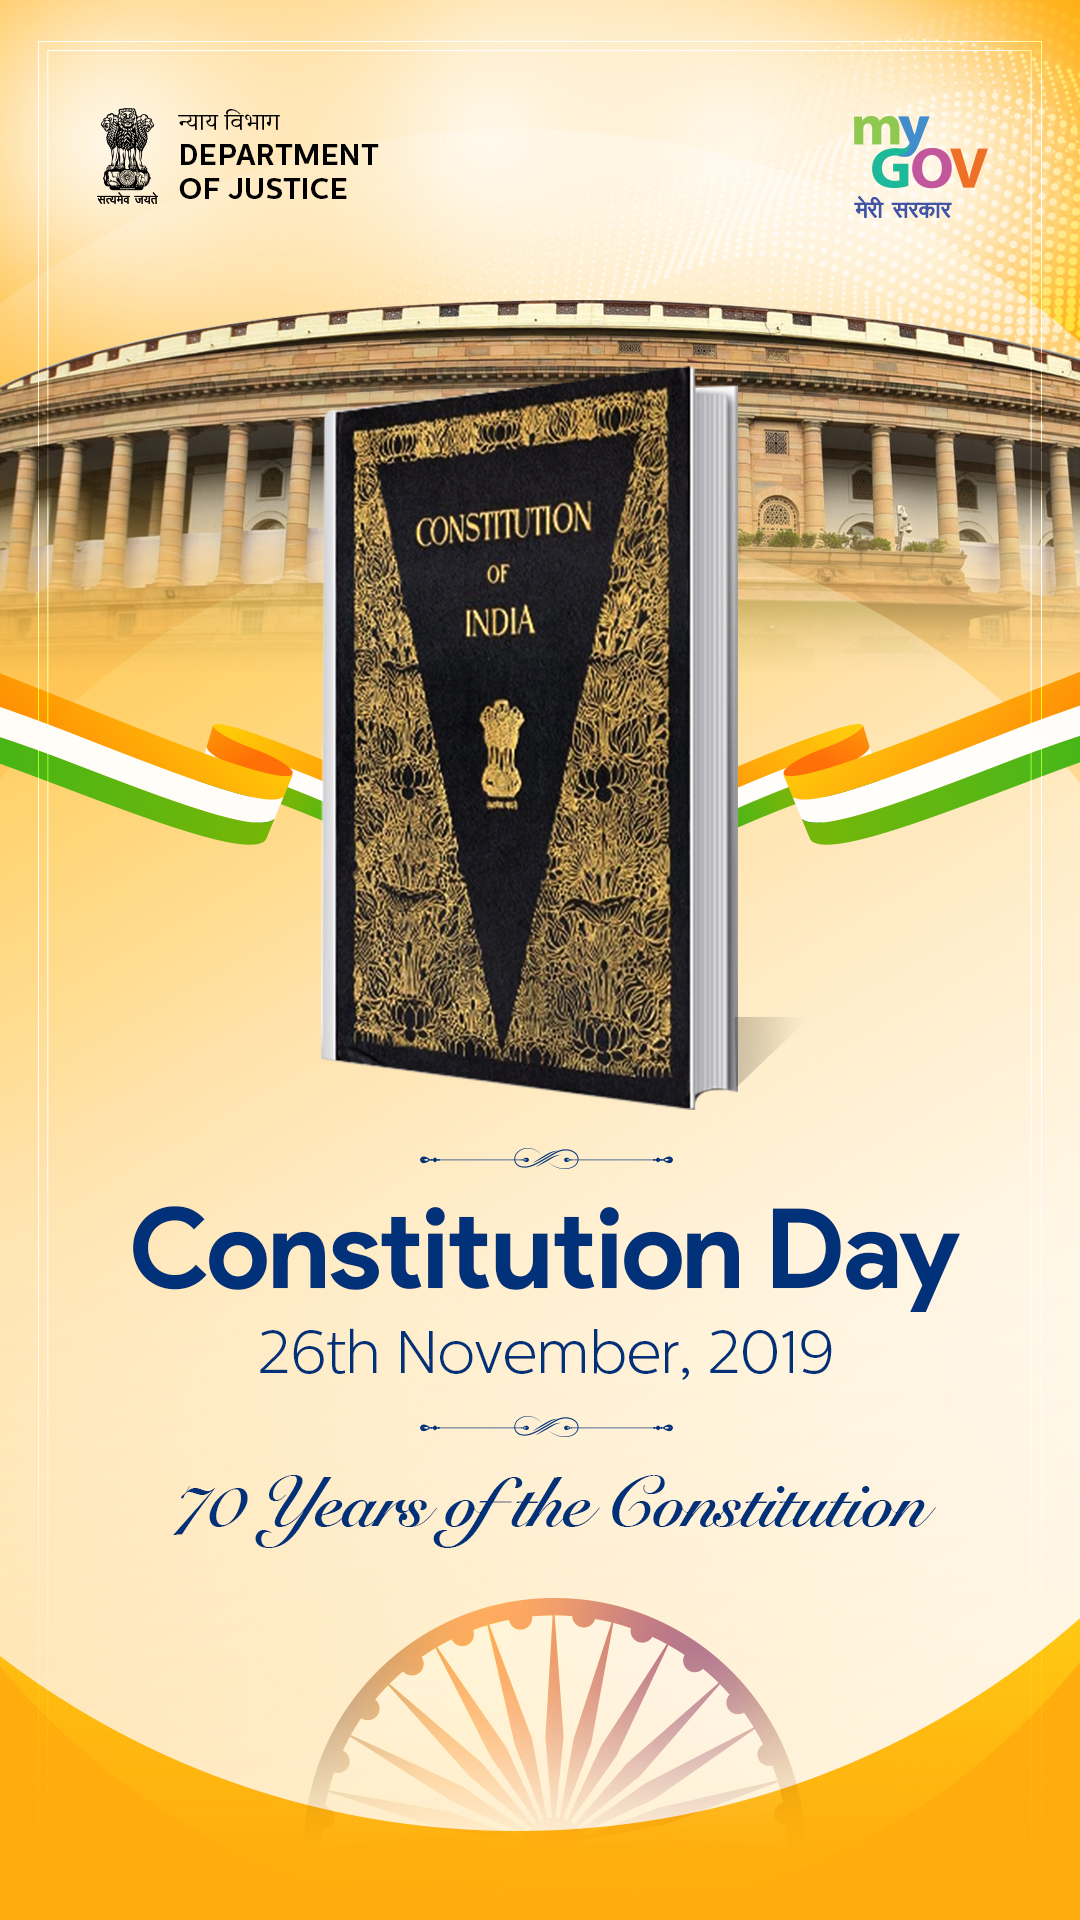 Top 101+ Indian constitution images wallpapers - Snkrsvalue.com